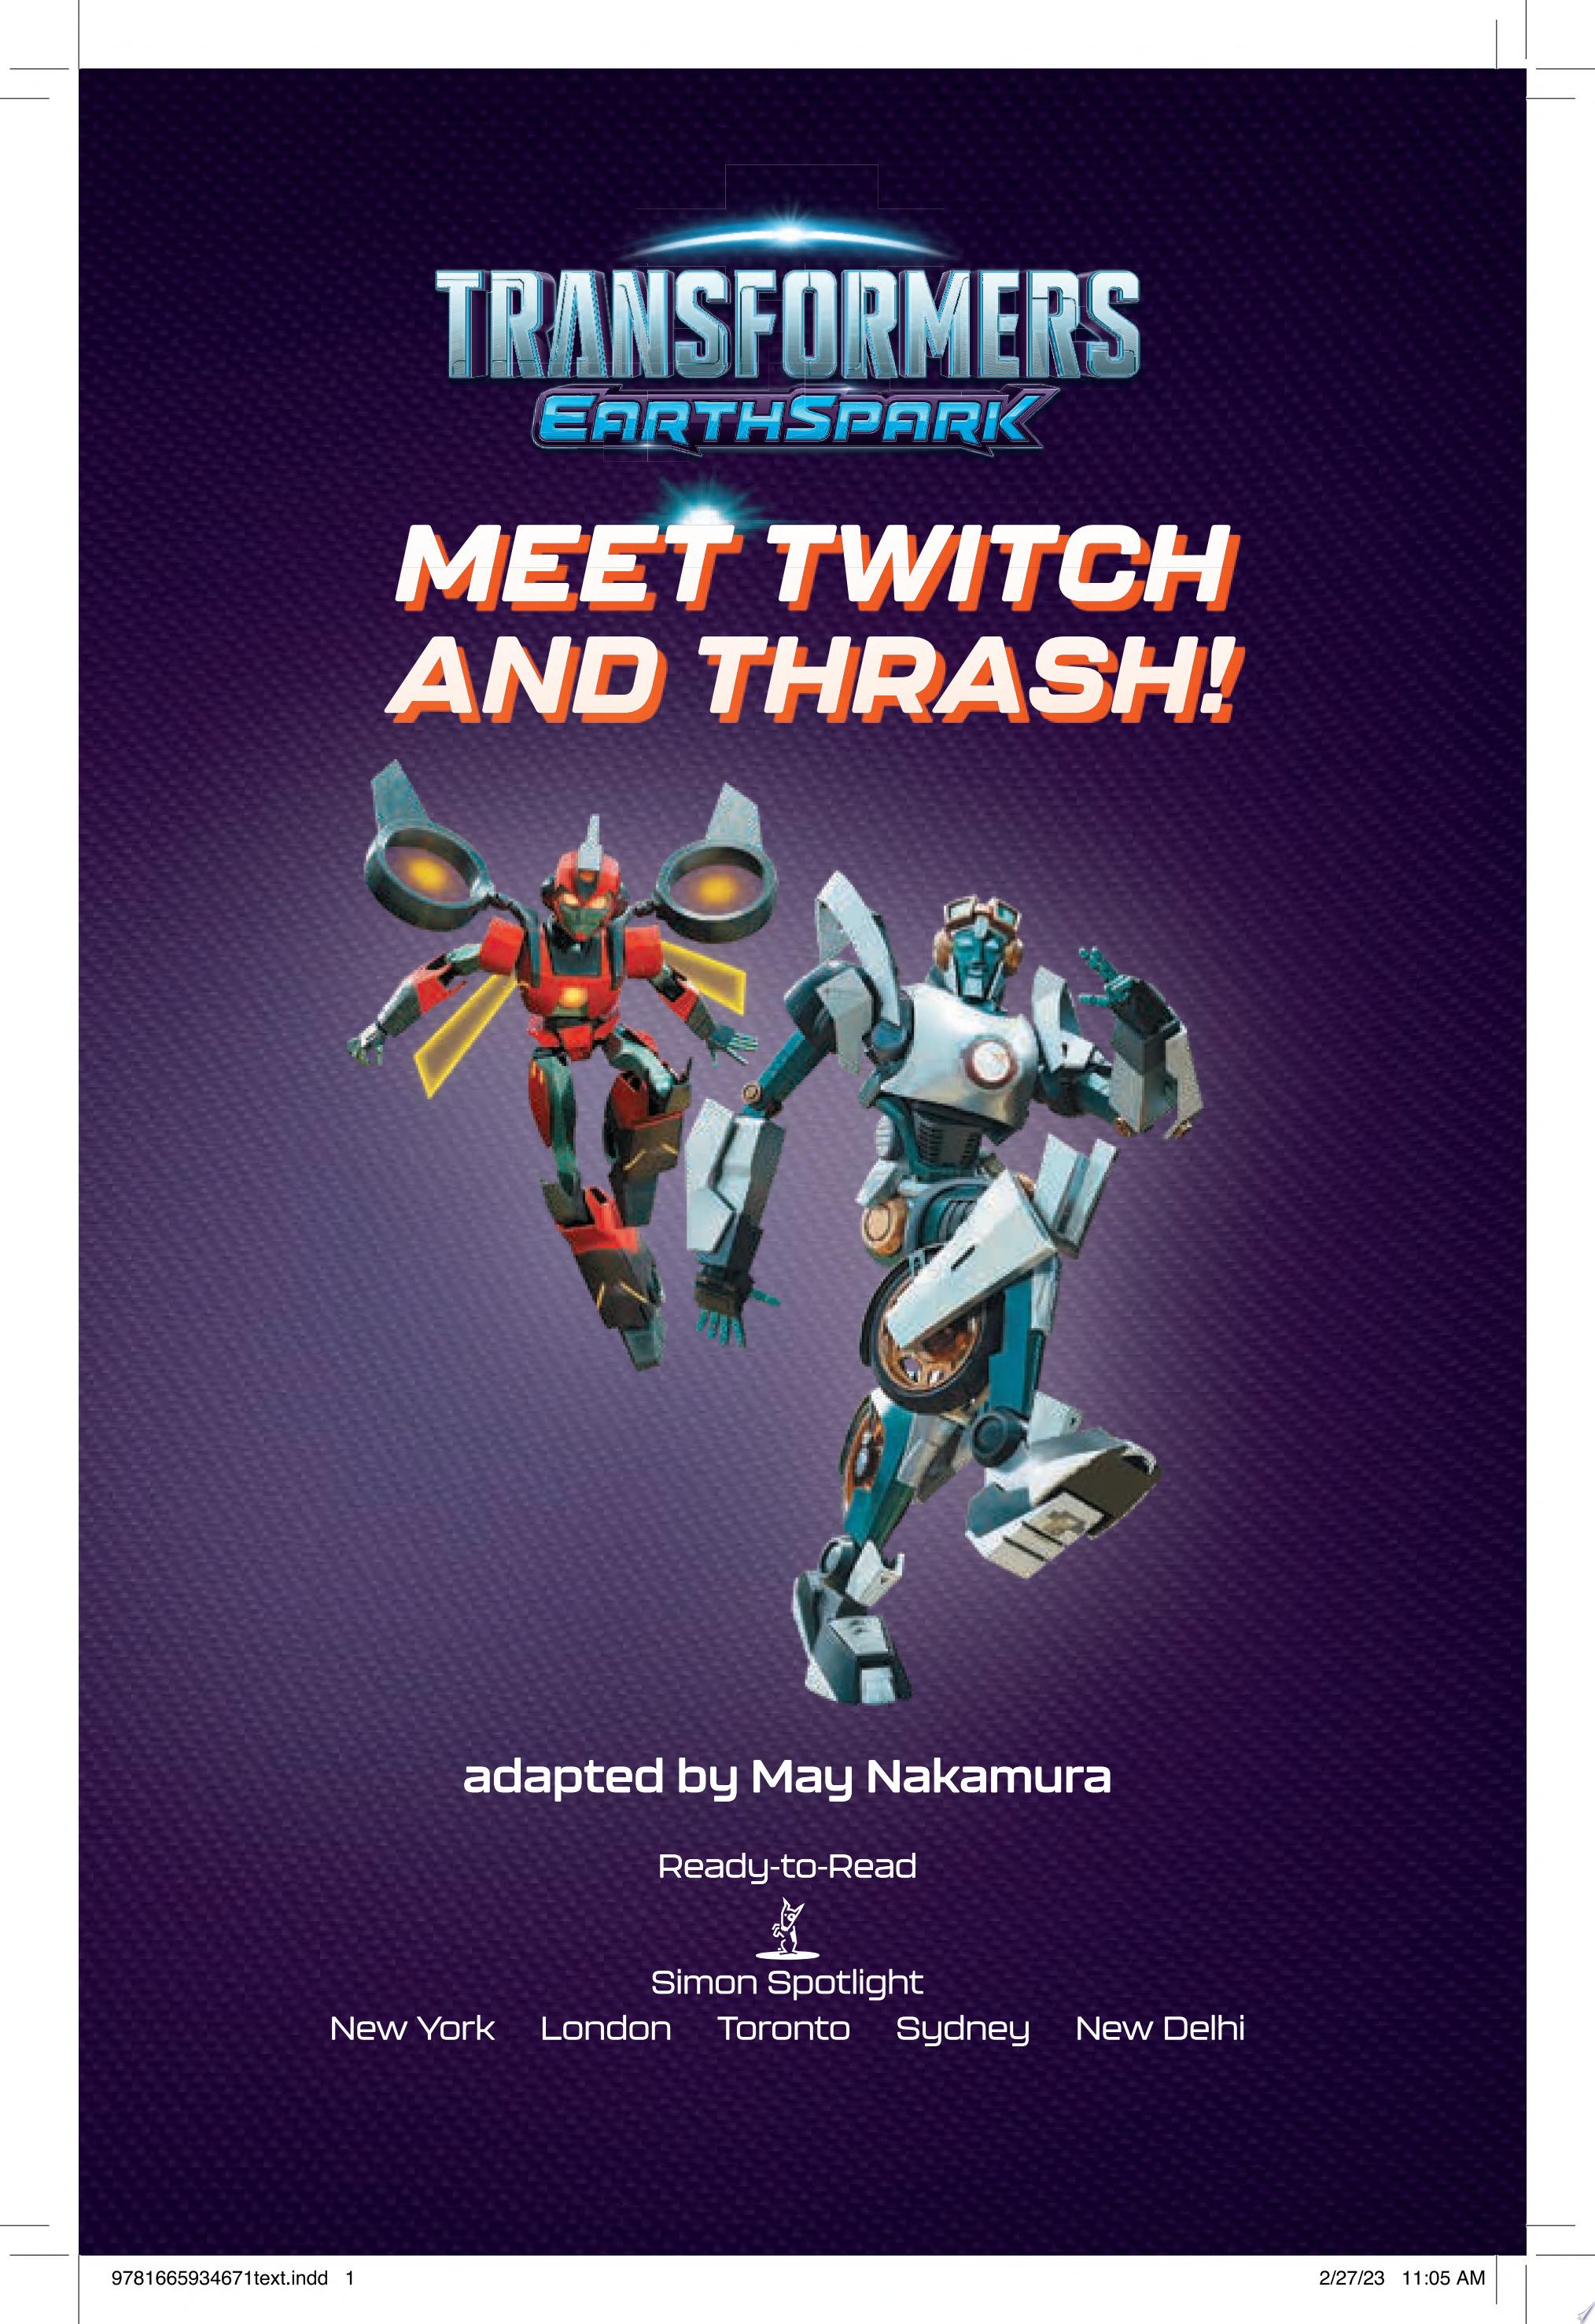 Image for "Meet Twitch and Thrash!"